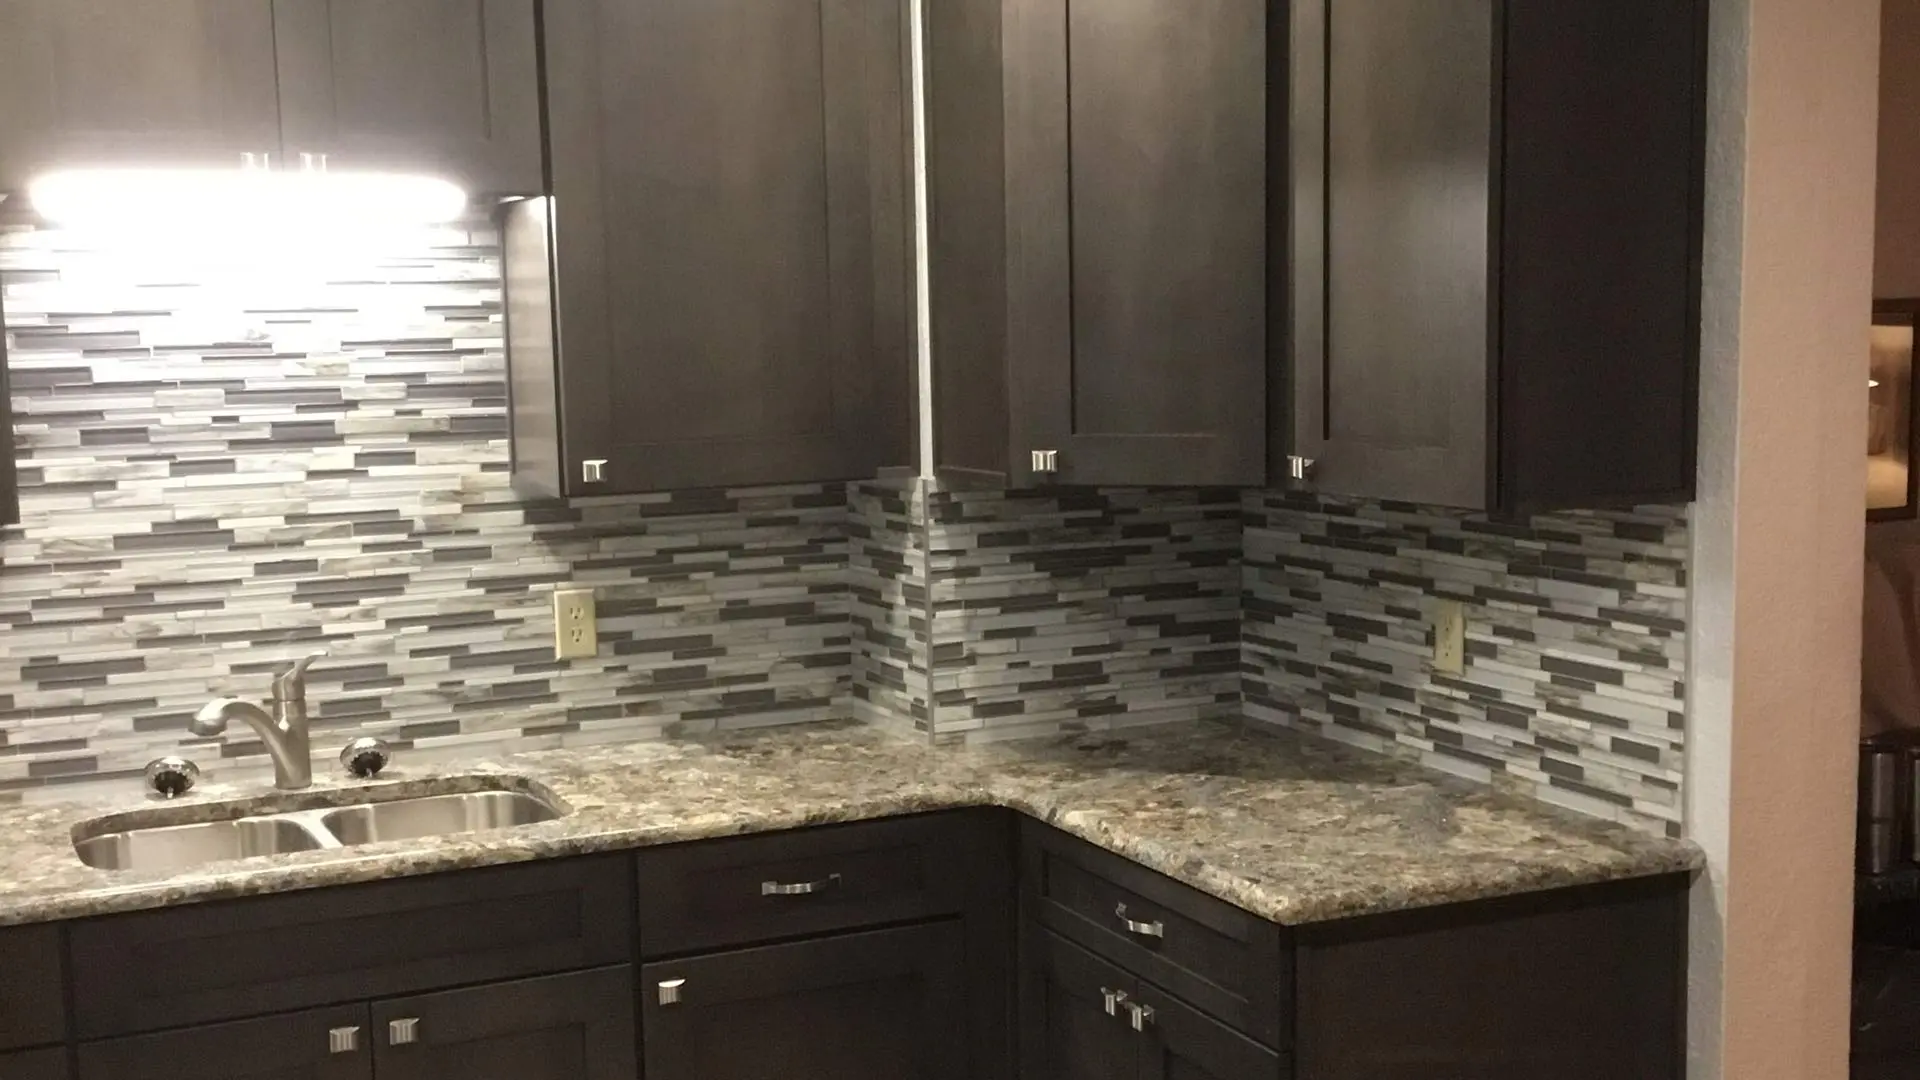 Example of a newly remodeled kitchen done by the professional team at True Builders for a homeowner in Haines City, FL.